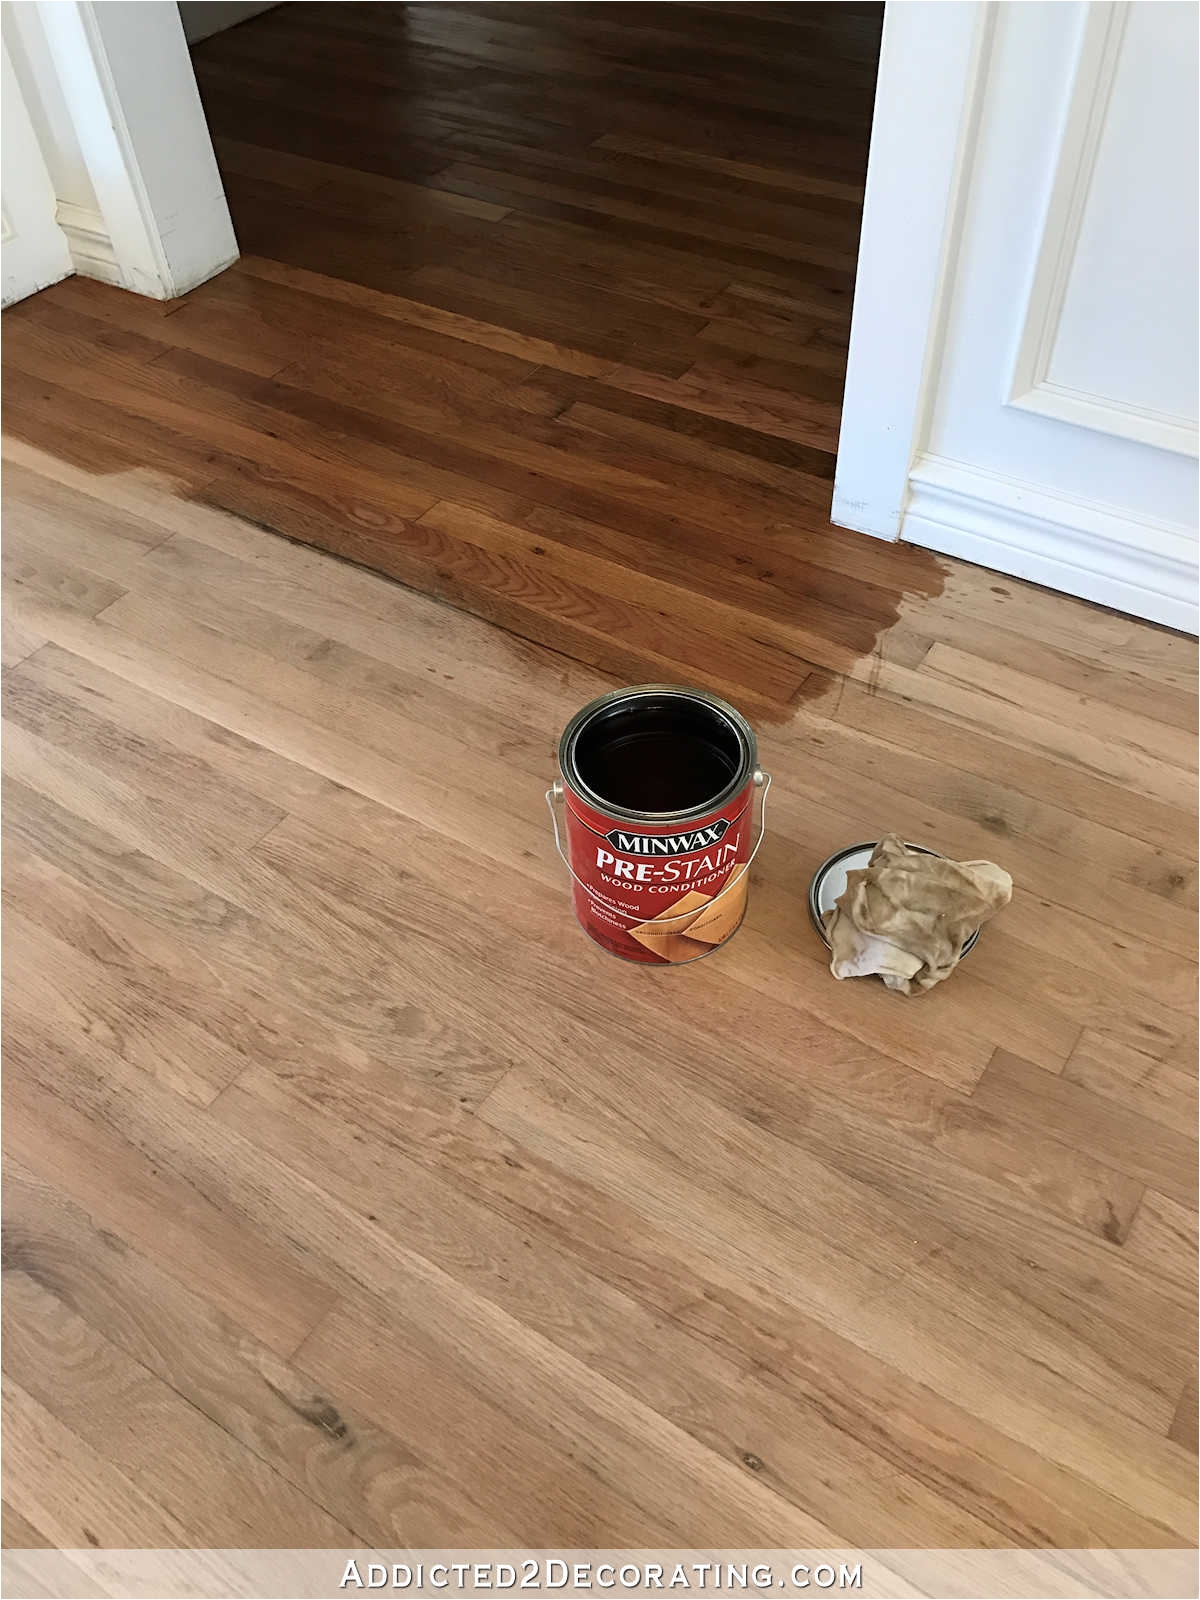 staining red oak hardwood floors 1 conditioning the wood with minwax pre stain